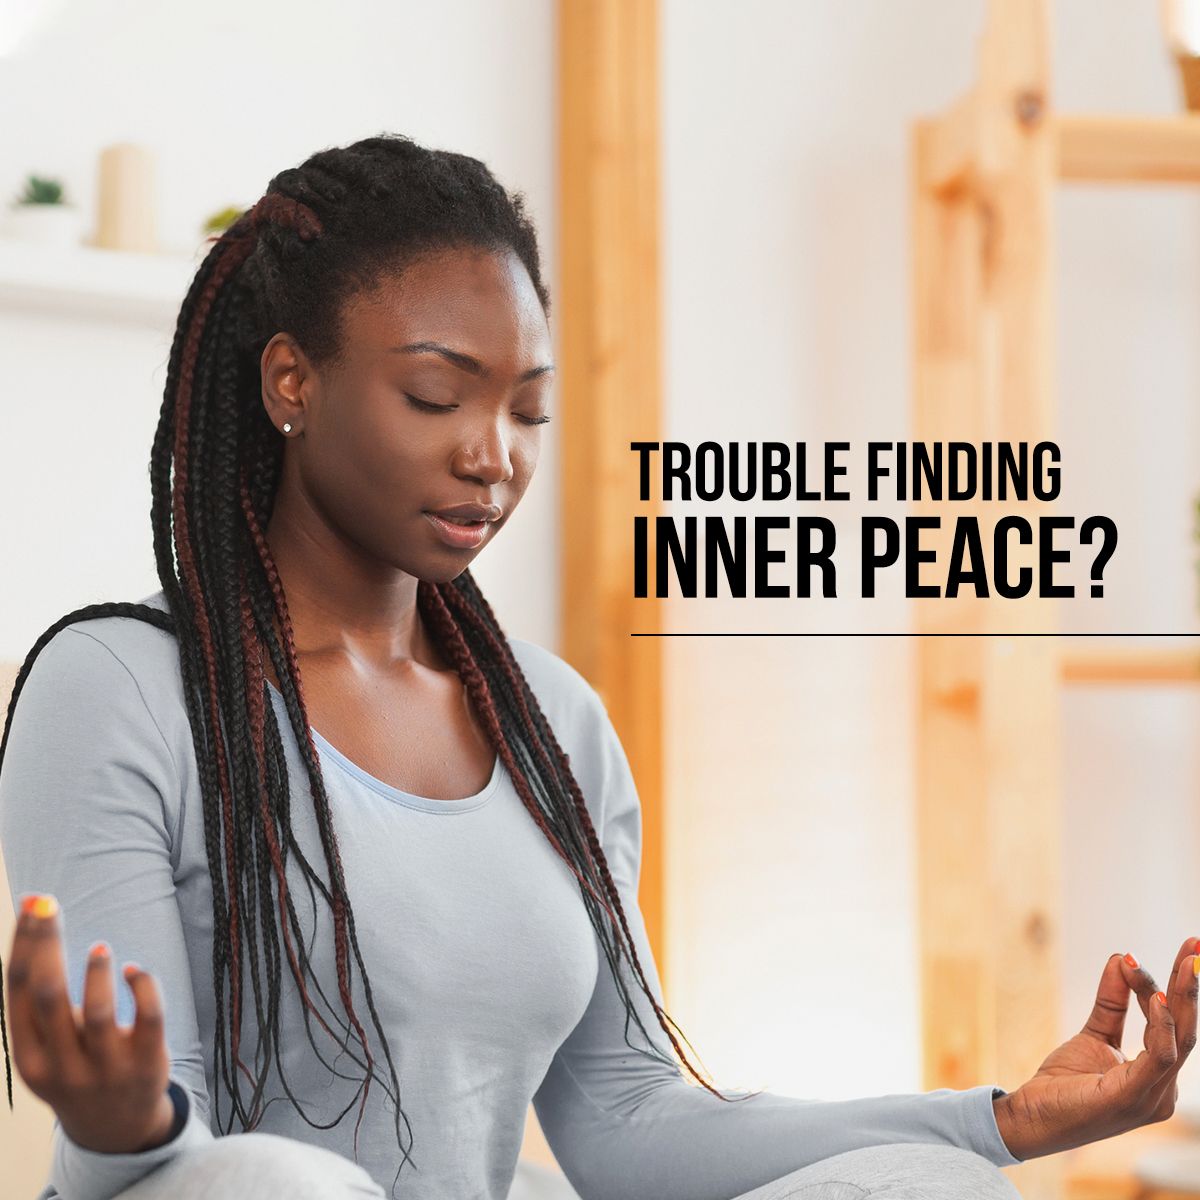 Trouble Finding Inner Peace?